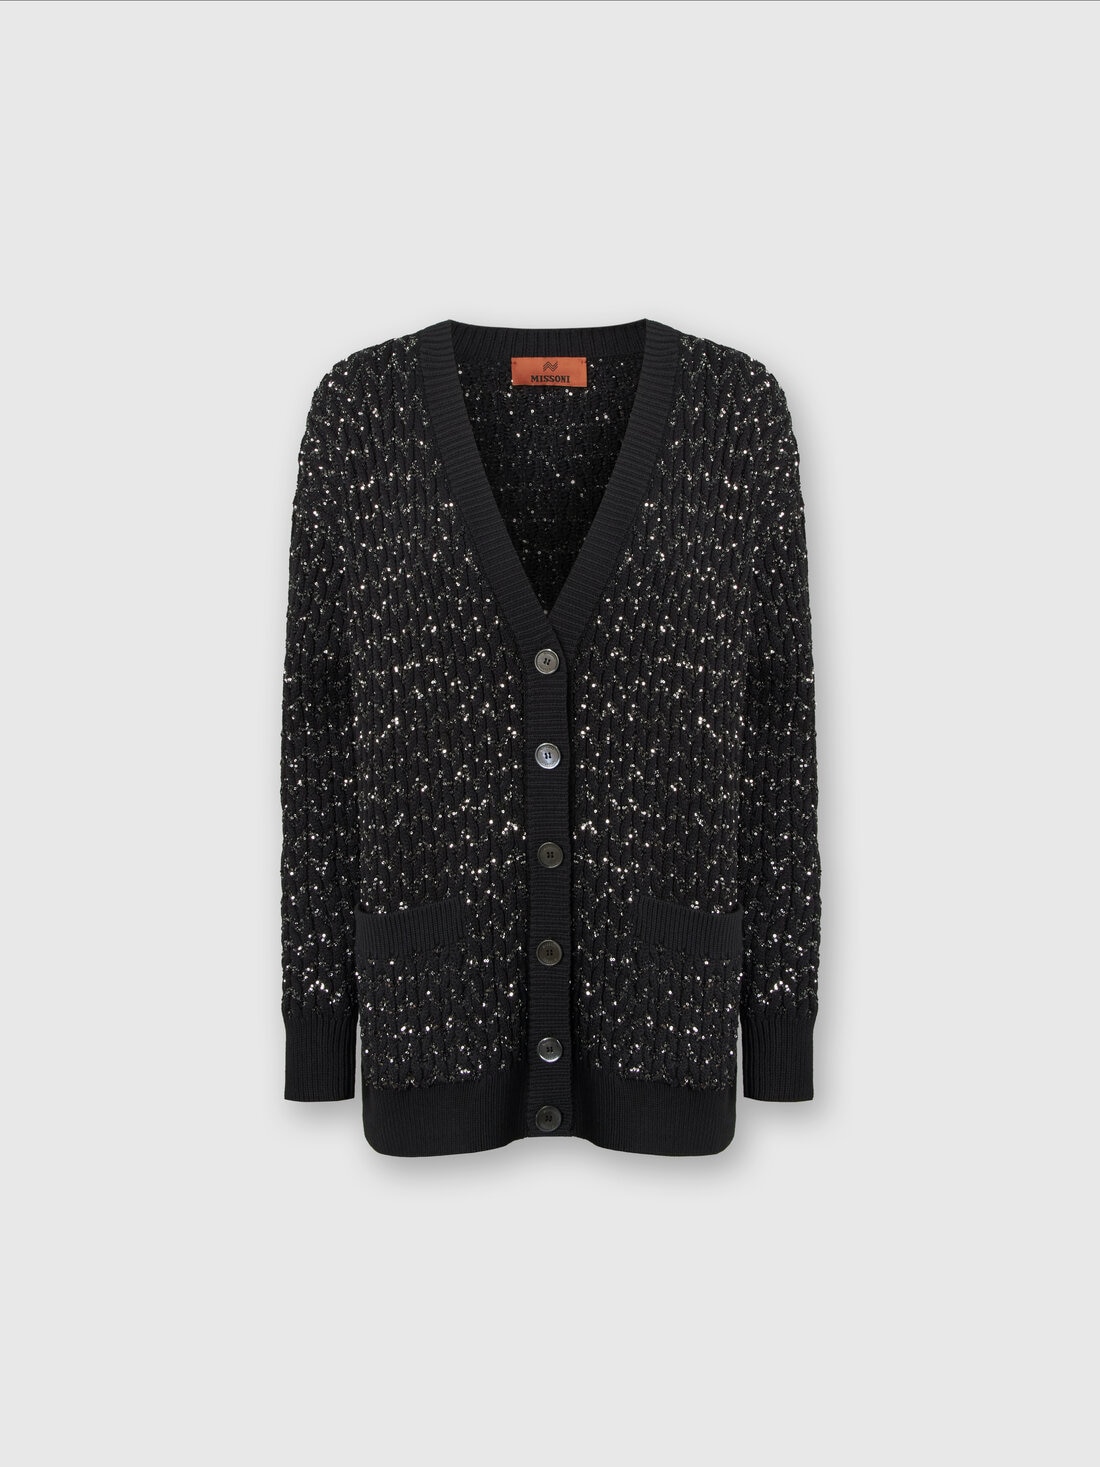 Oversized cardigan in knit with braiding and sequins, Black    - DS24SM0GBK033OS90DI - 0